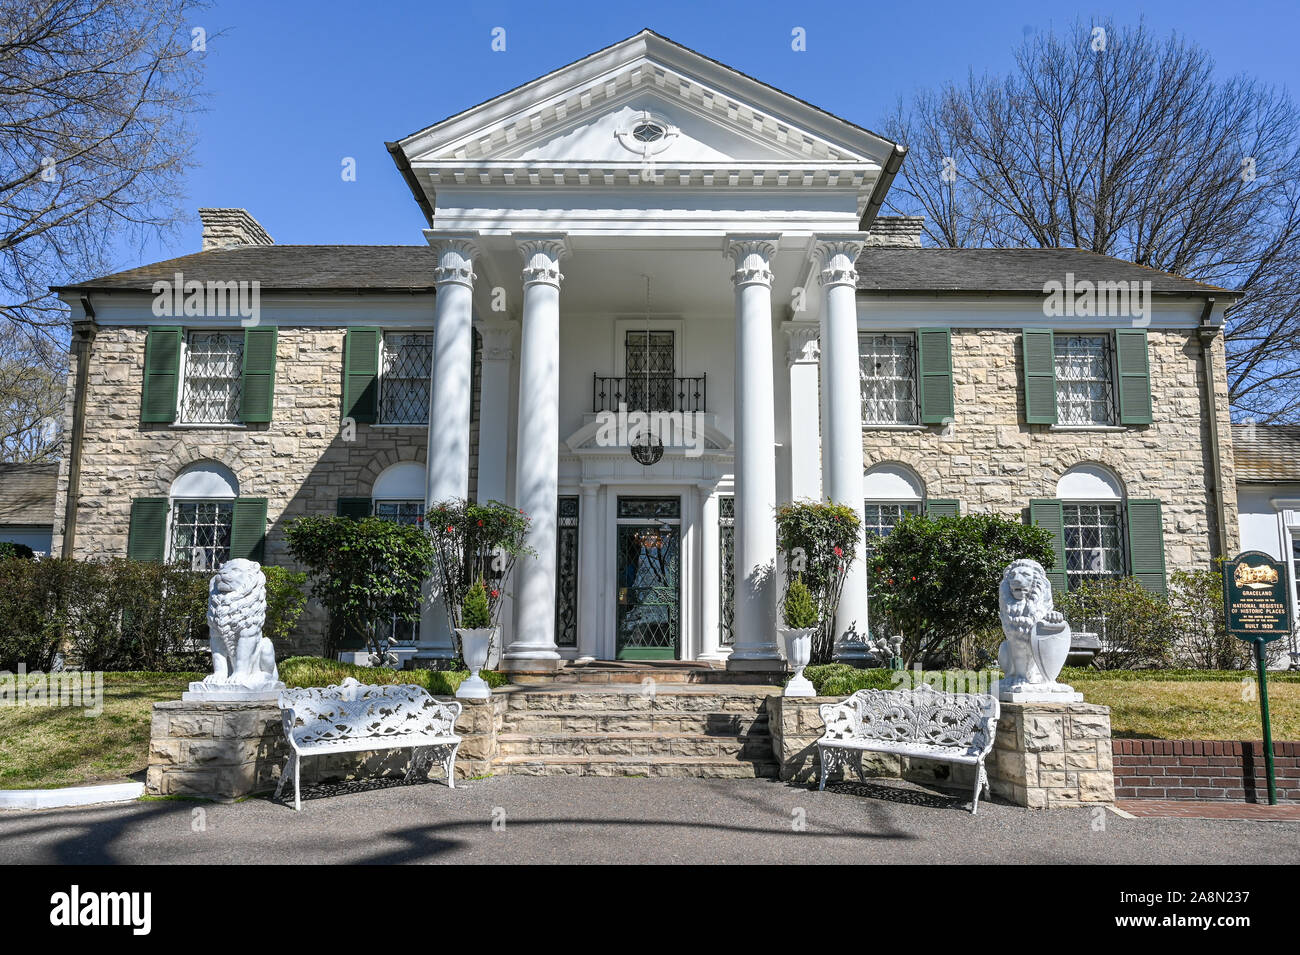 Graceland in Memphis. The mansion was  built in 1939 but later bought by Elvis Presley who lived here from 1957 – 1977. Stock Photo